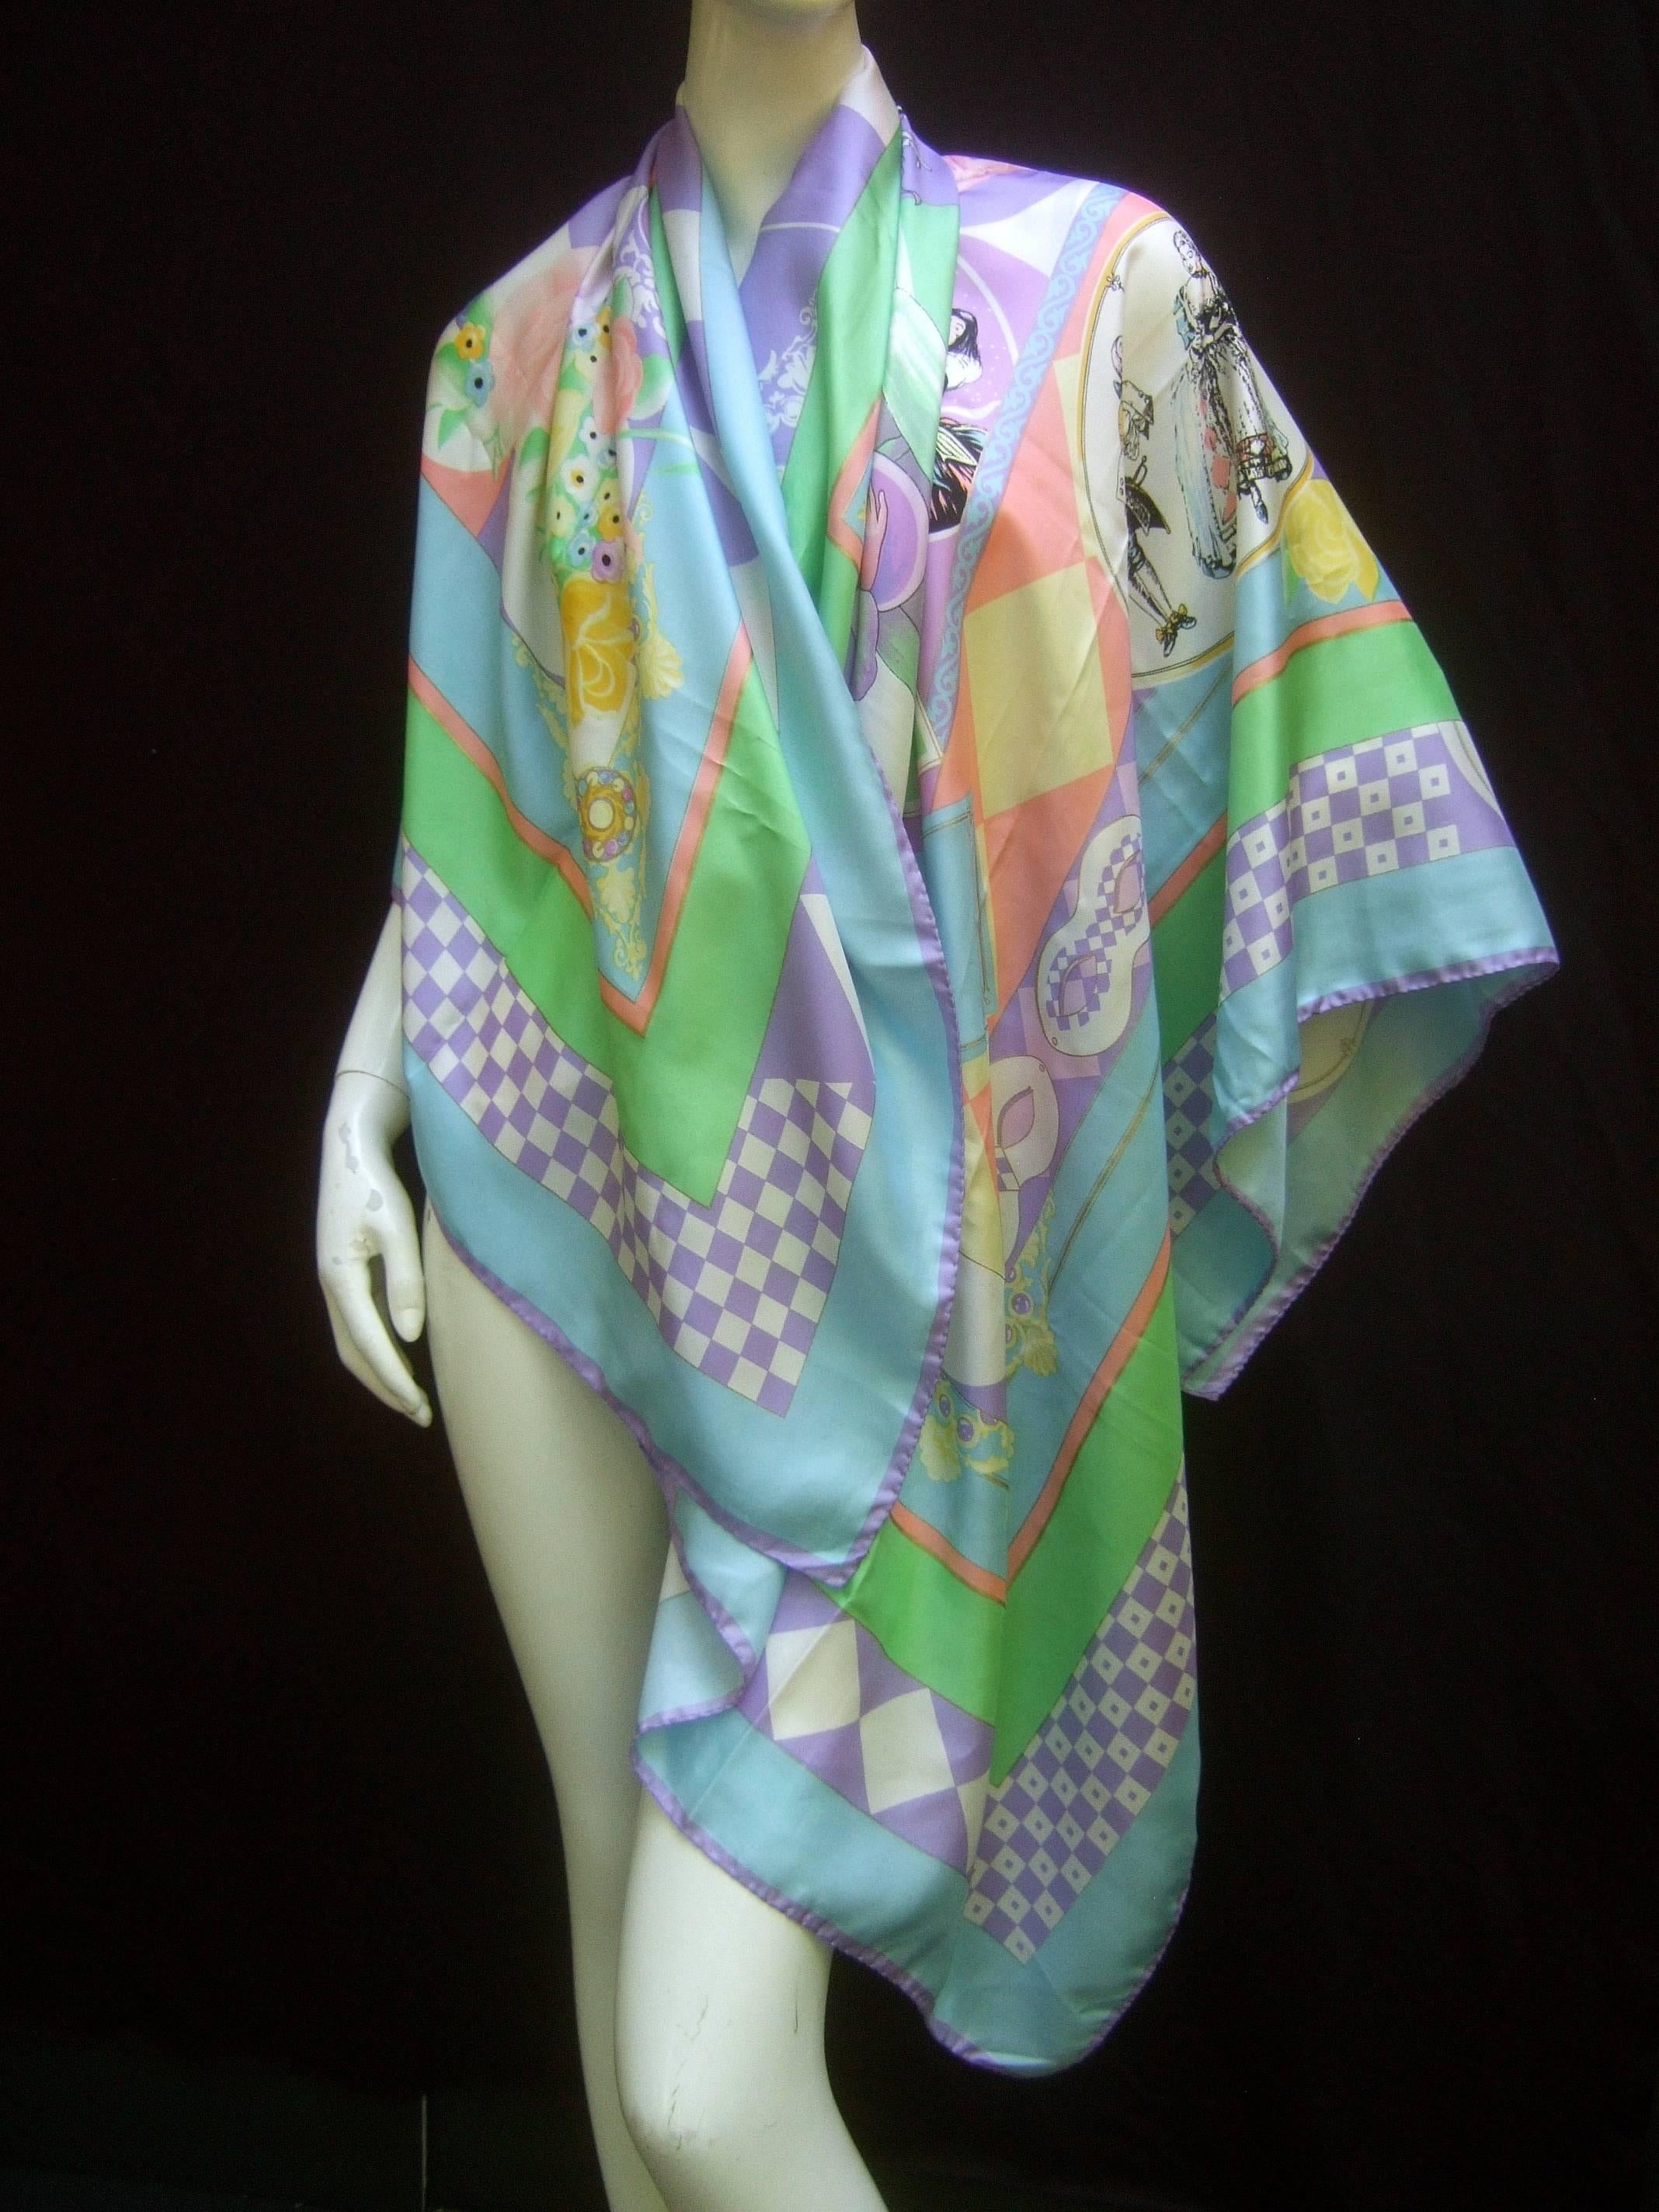 Exquisite Italian pastel silk Venice theme massive shawl - scarf
The luxurious silk textile is illustrated with a collection
of dramatic figures in vibrant costumes and masks 

The colorful figures include a court jester, mandolin
player, a romantic